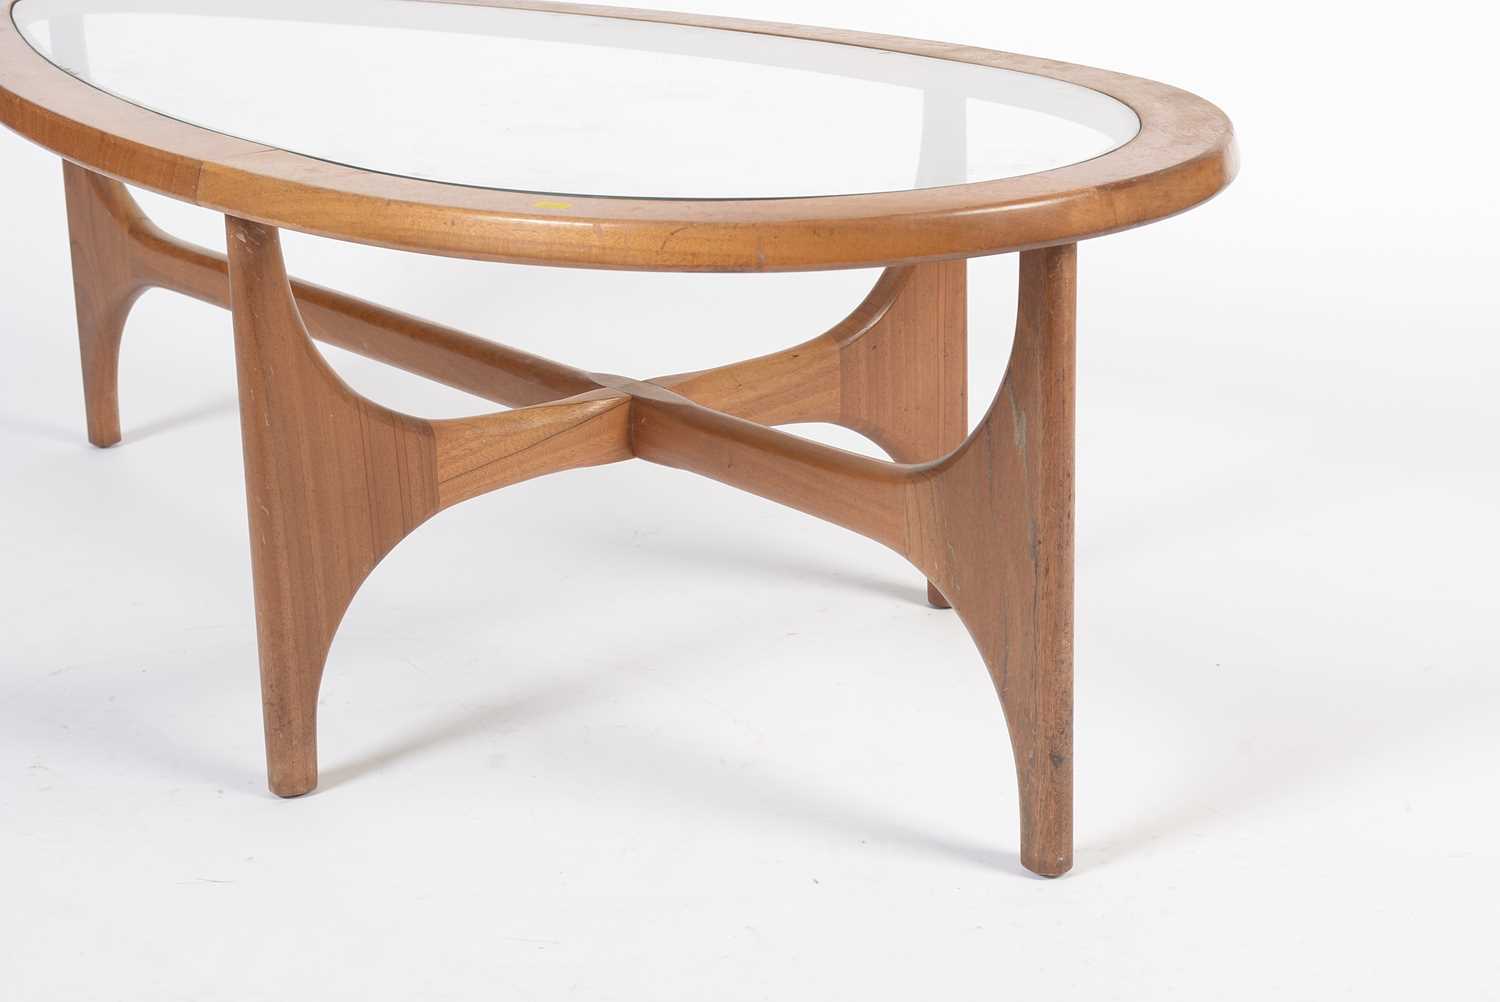 Stateroom by Stonehill: a mid-Century teak and glass coffee table of teardrop form - Image 6 of 8